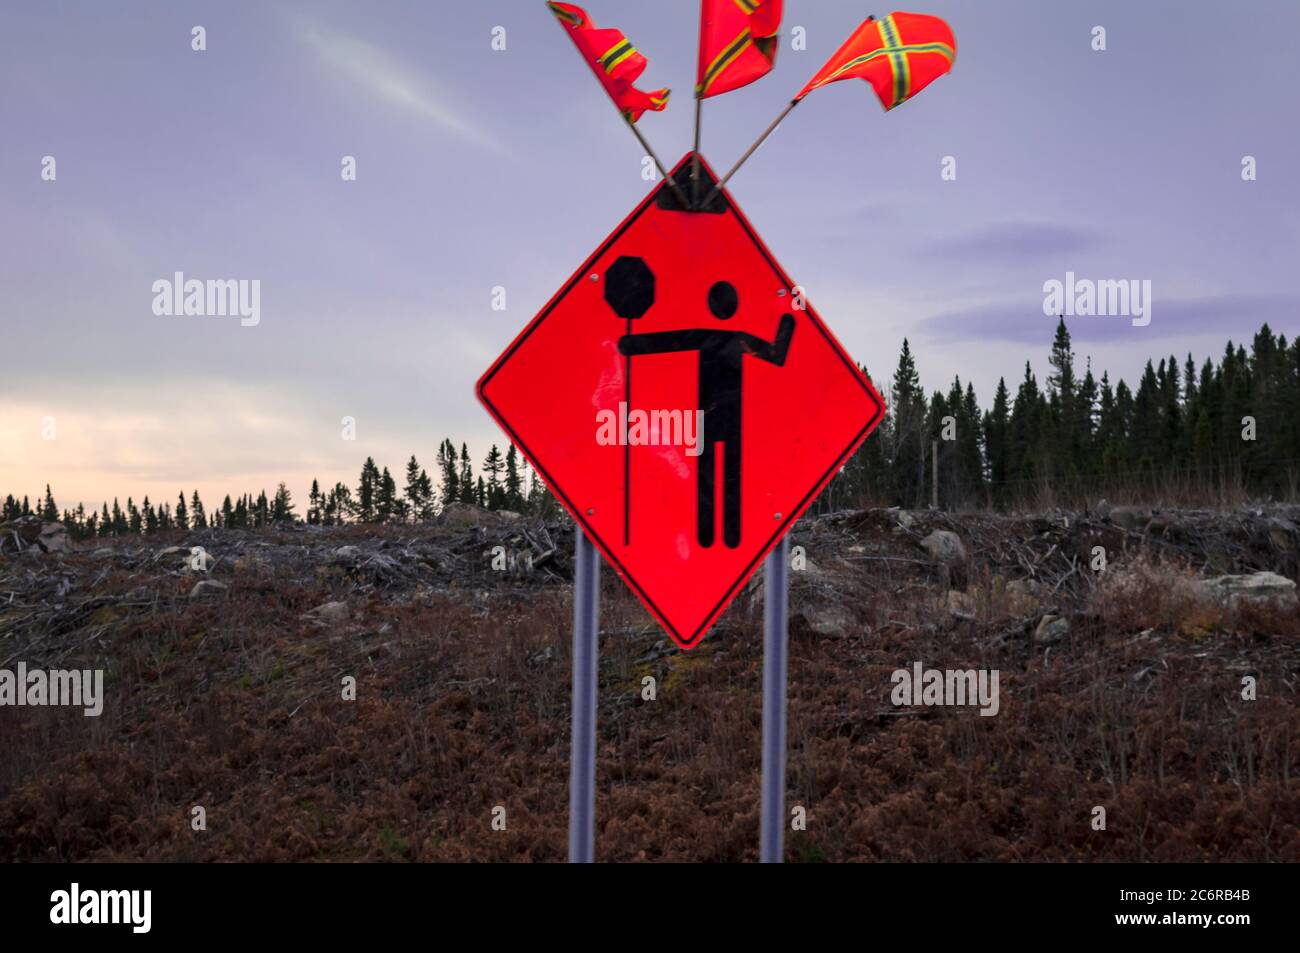 A pictograph in a construction zone. Heads up for vehicle operators that a flag man with a STOP sign is directing traffic on the road ahead, Canada. Stock Photo